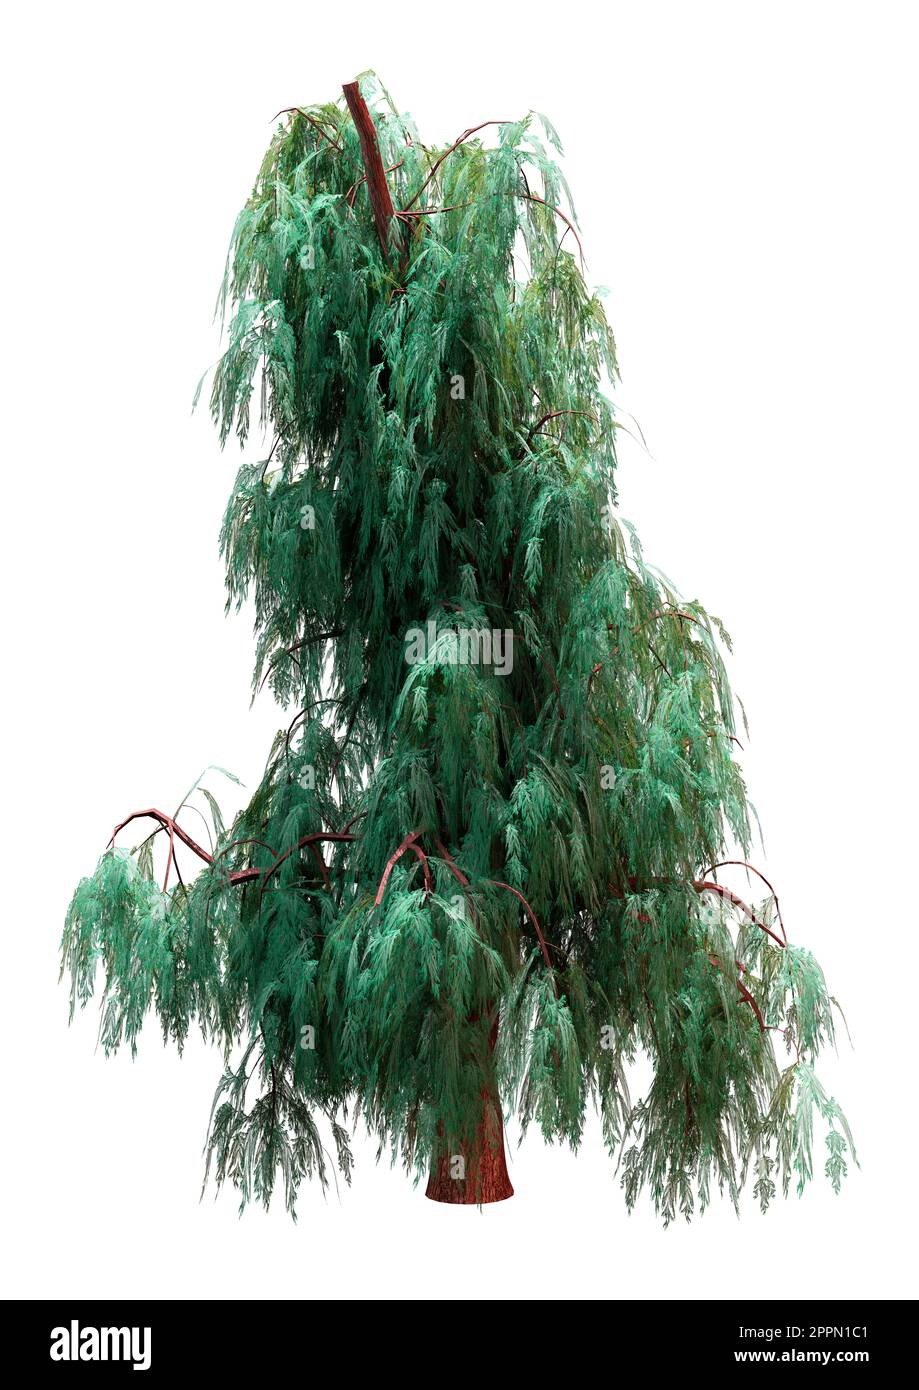 3D rendering of a Kashmir cypress tree isolated on white background Stock Photo